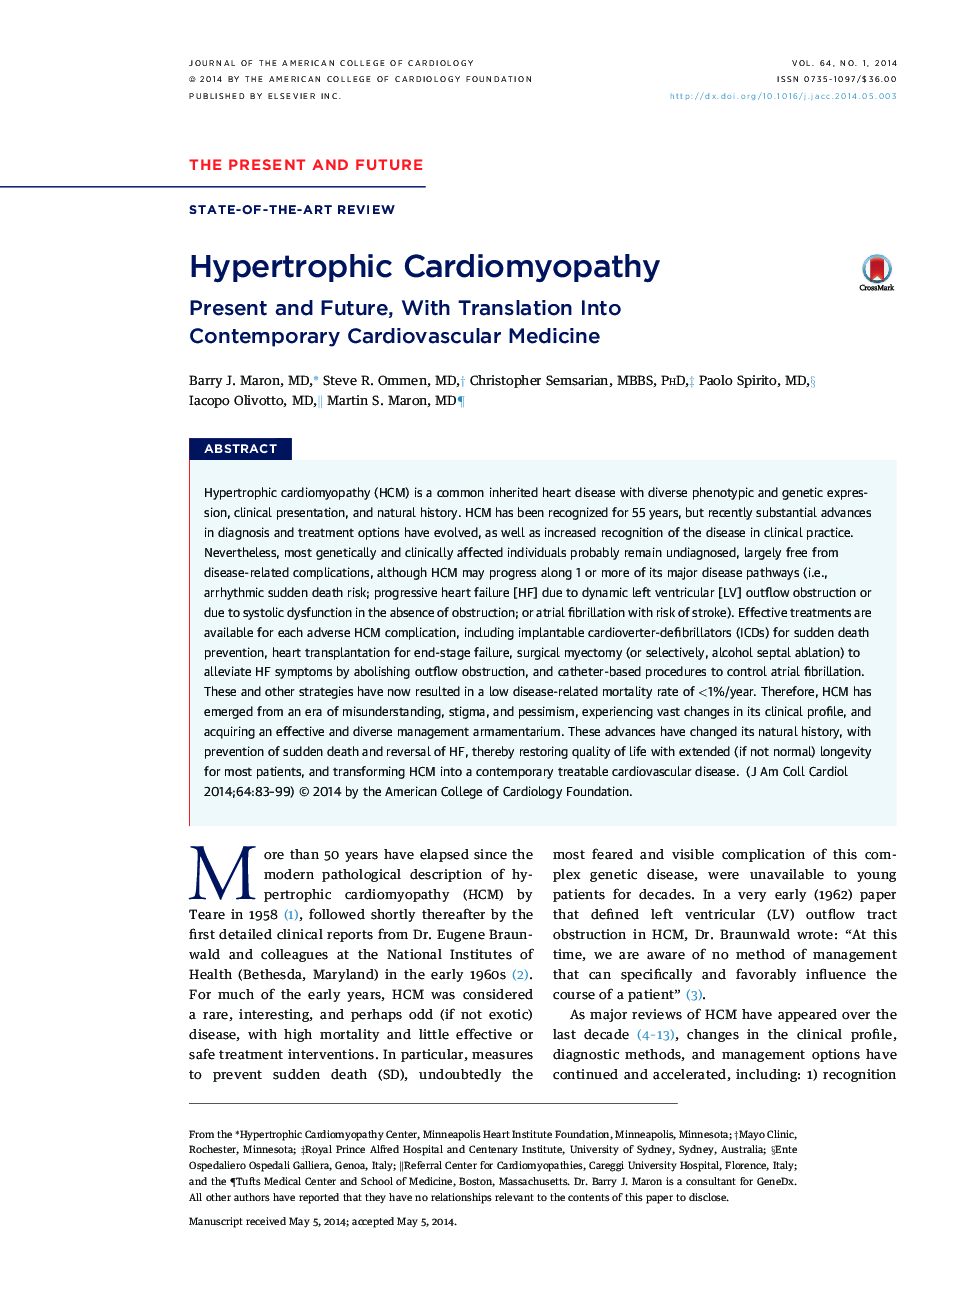 Hypertrophic Cardiomyopathy: Present and Future, With Translation Into Contemporary Cardiovascular Medicine